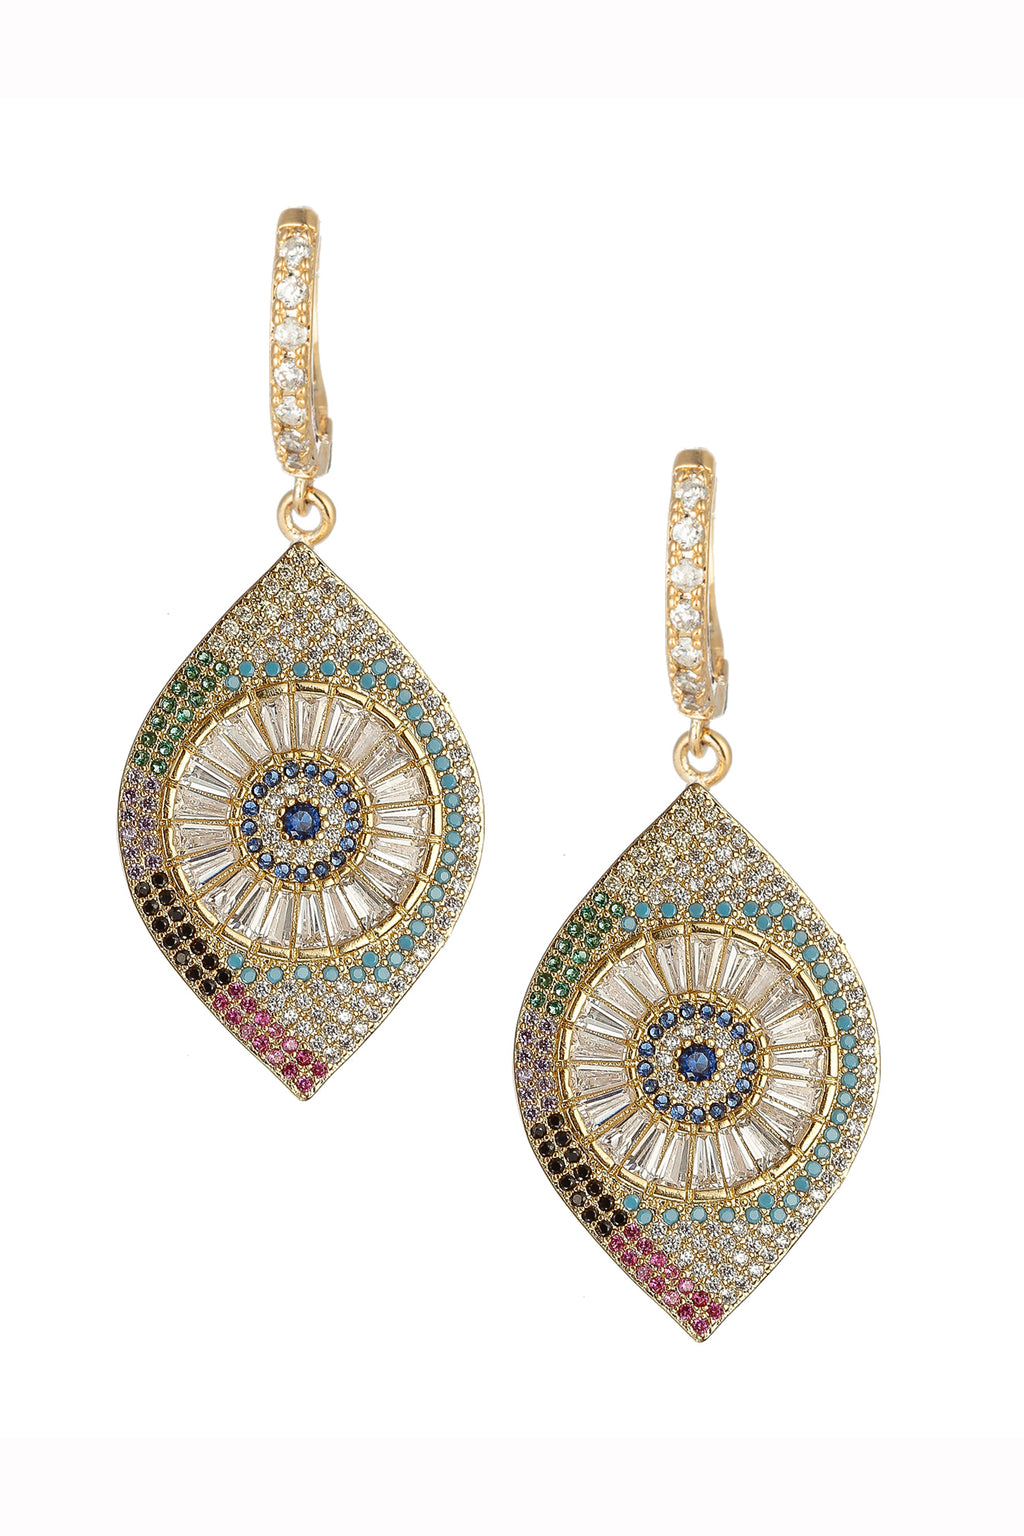 Double evil eye drop earrings studded with CZ crystals.